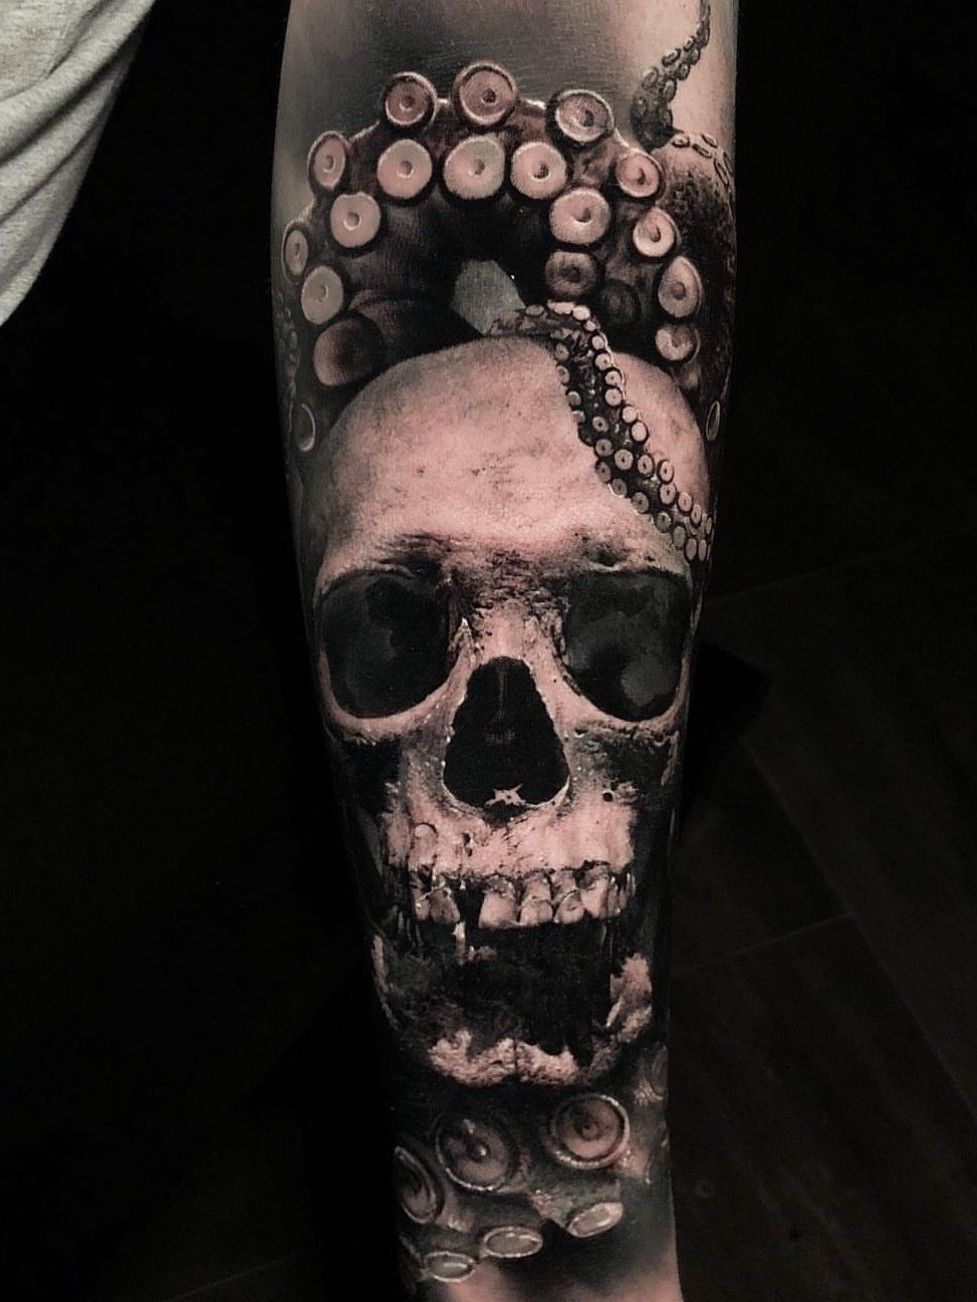 Skull Octopus done by She Tattoos in Appleton Wi  rtattoos